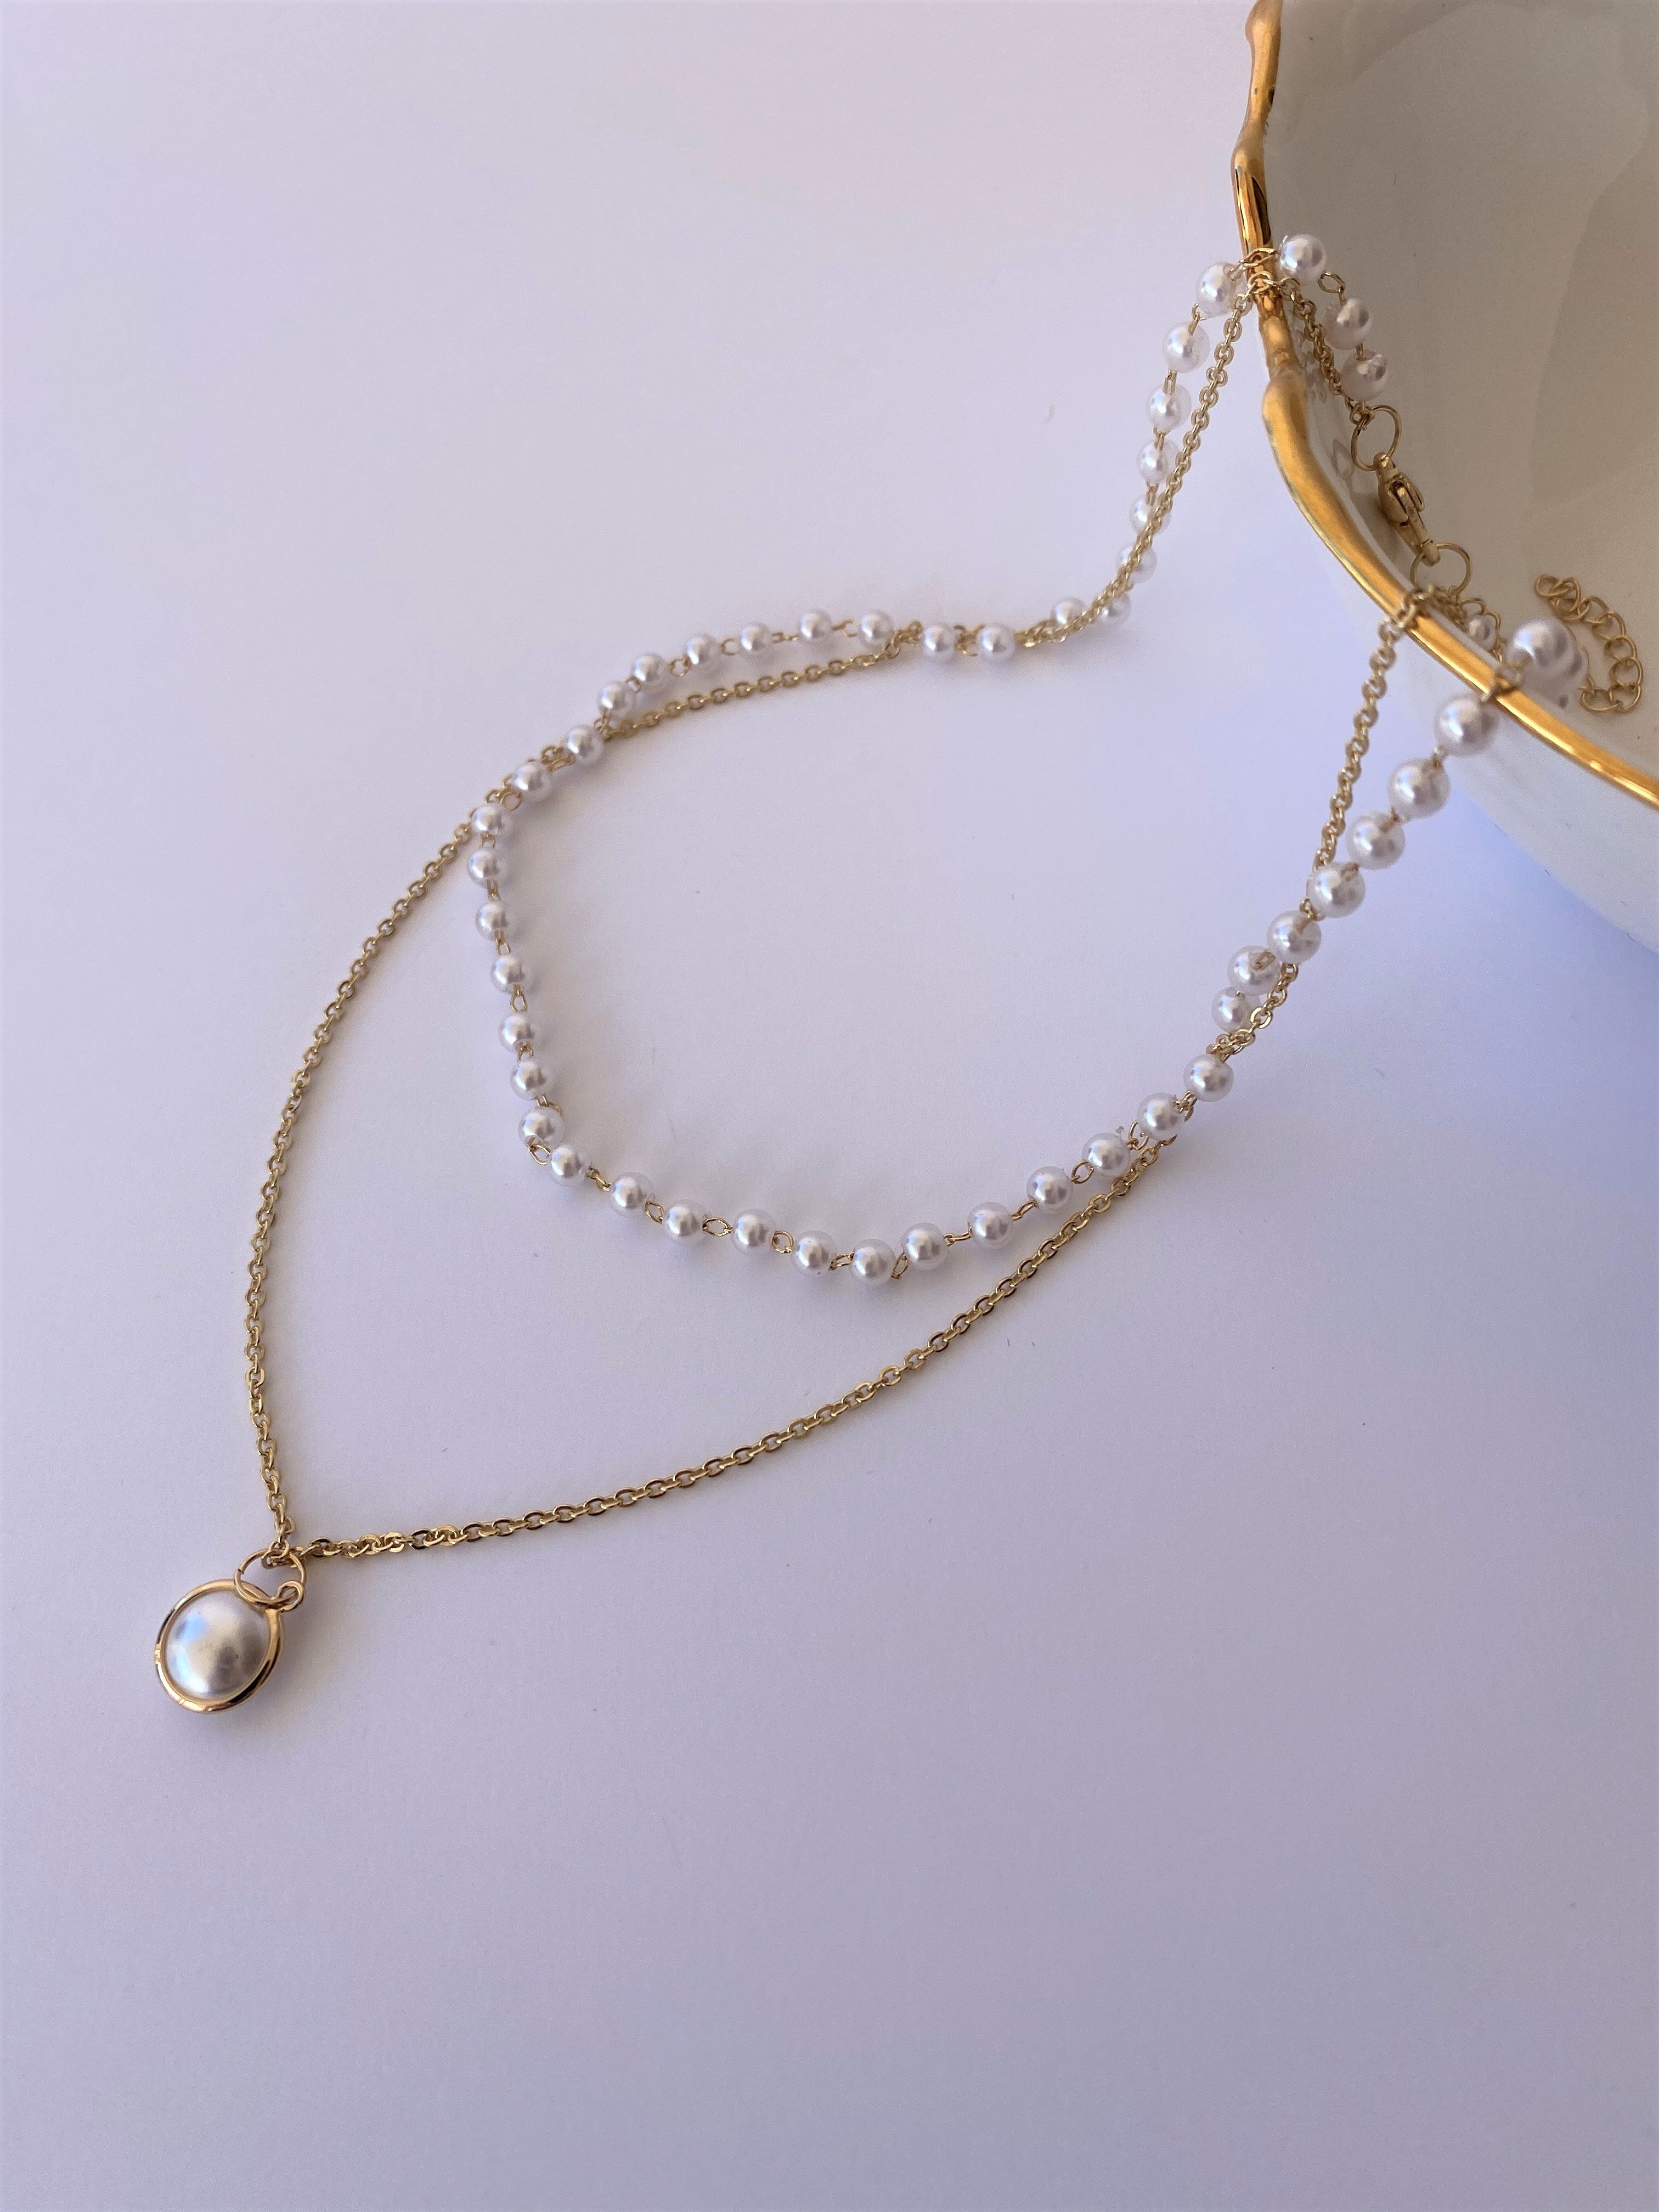 THE ELEANOR PEARL NECKLACE SET